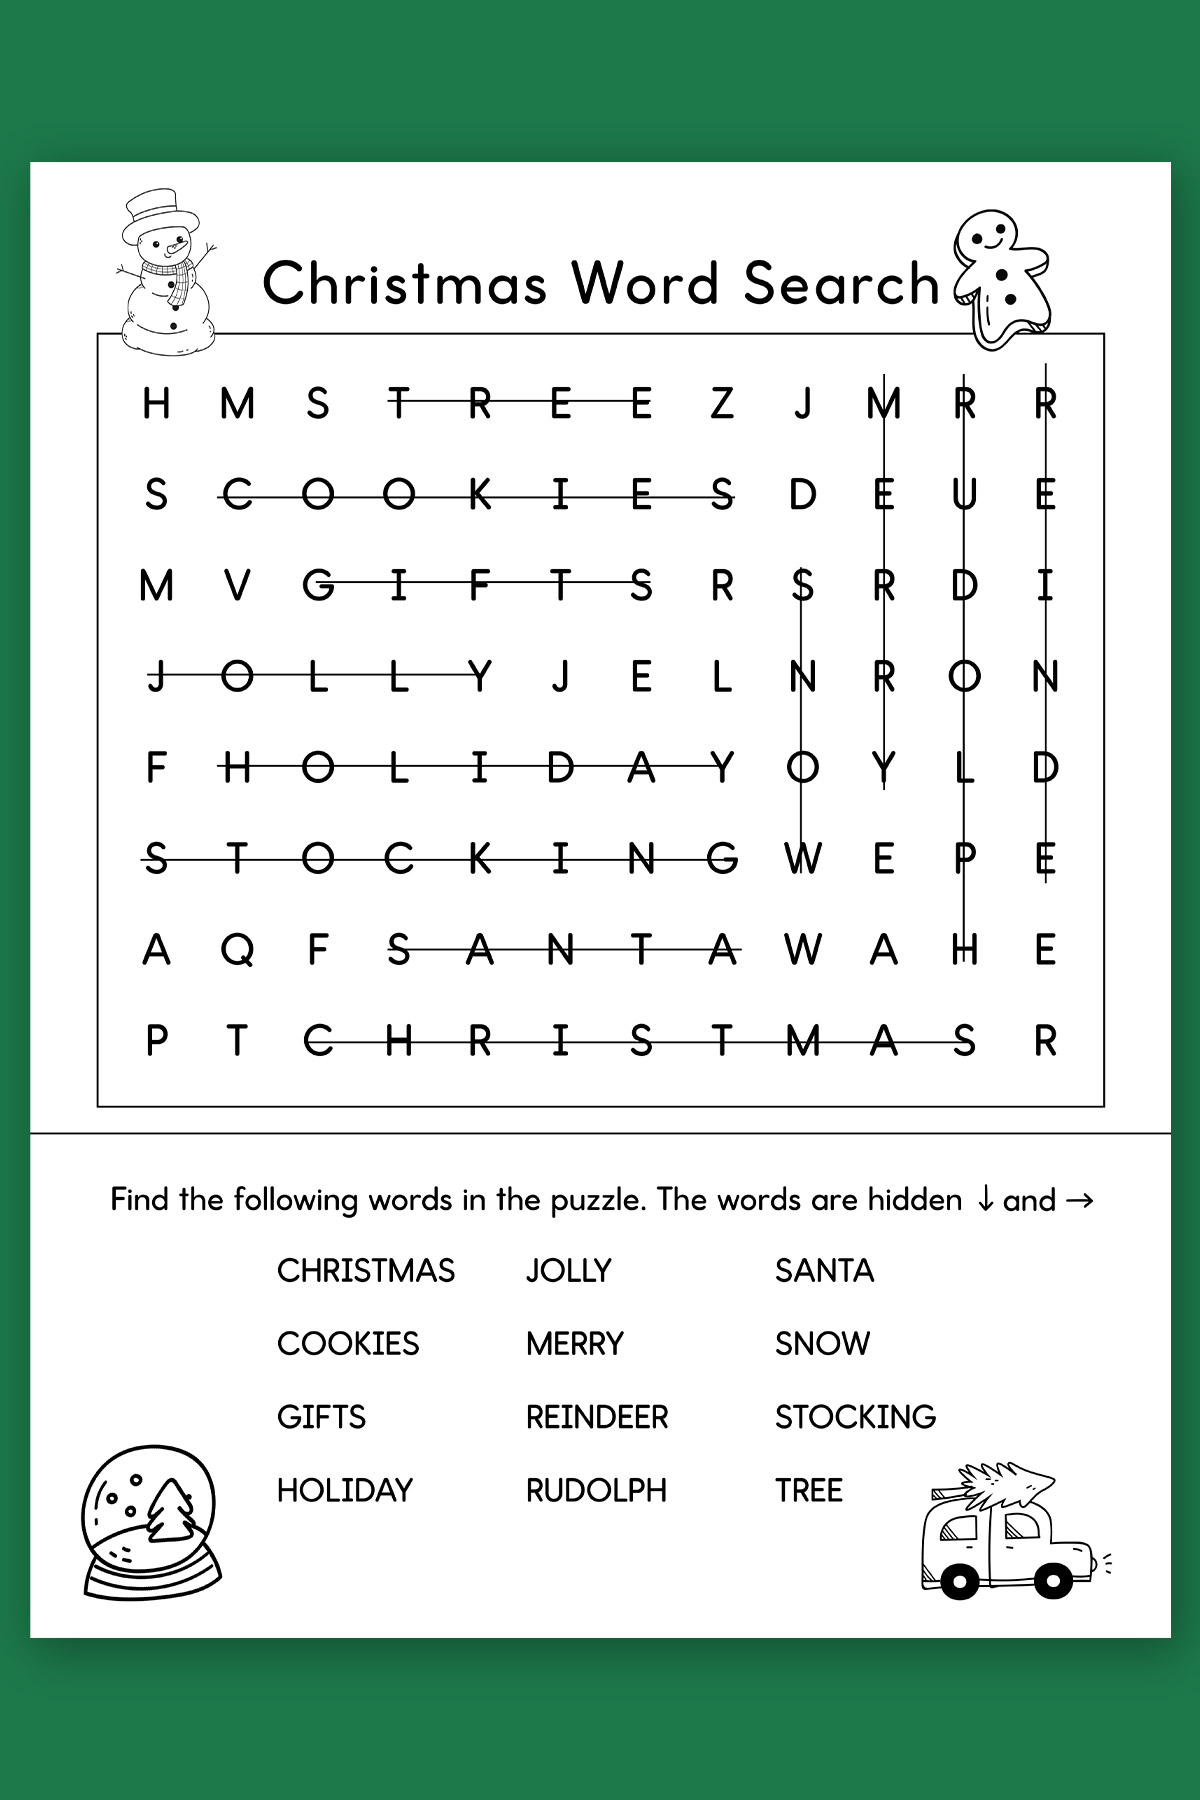 This is an example of one answer keys for the free words searches you can get from the Christmas word find printable set. 